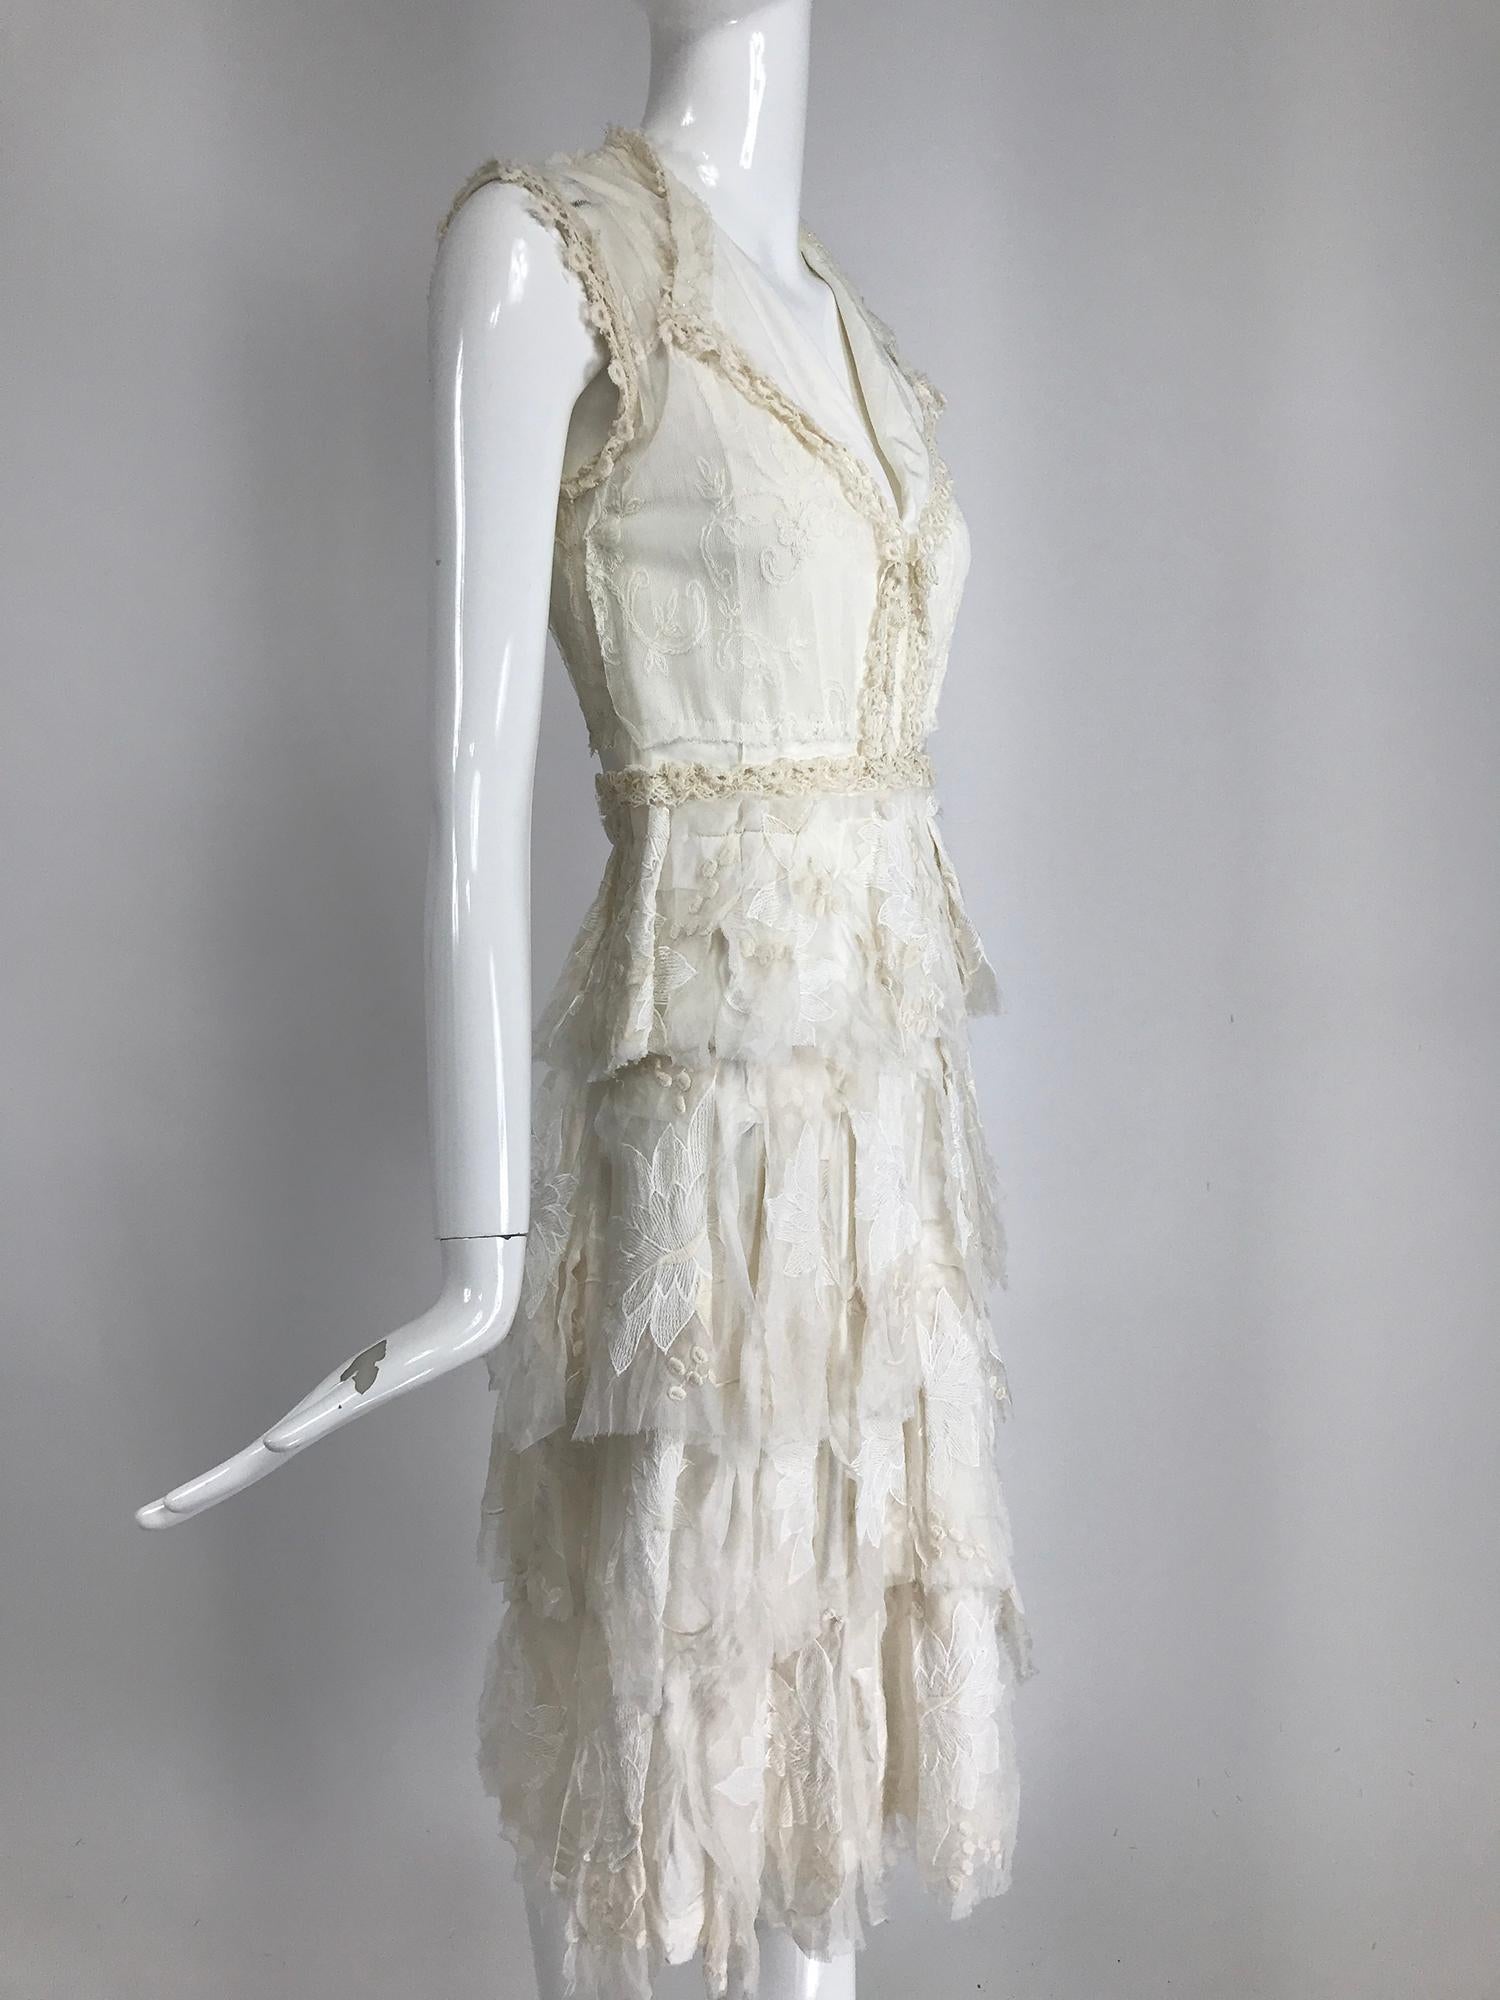 Gregory Parkinson Pieced Applique White Silk and Lace Dress 1